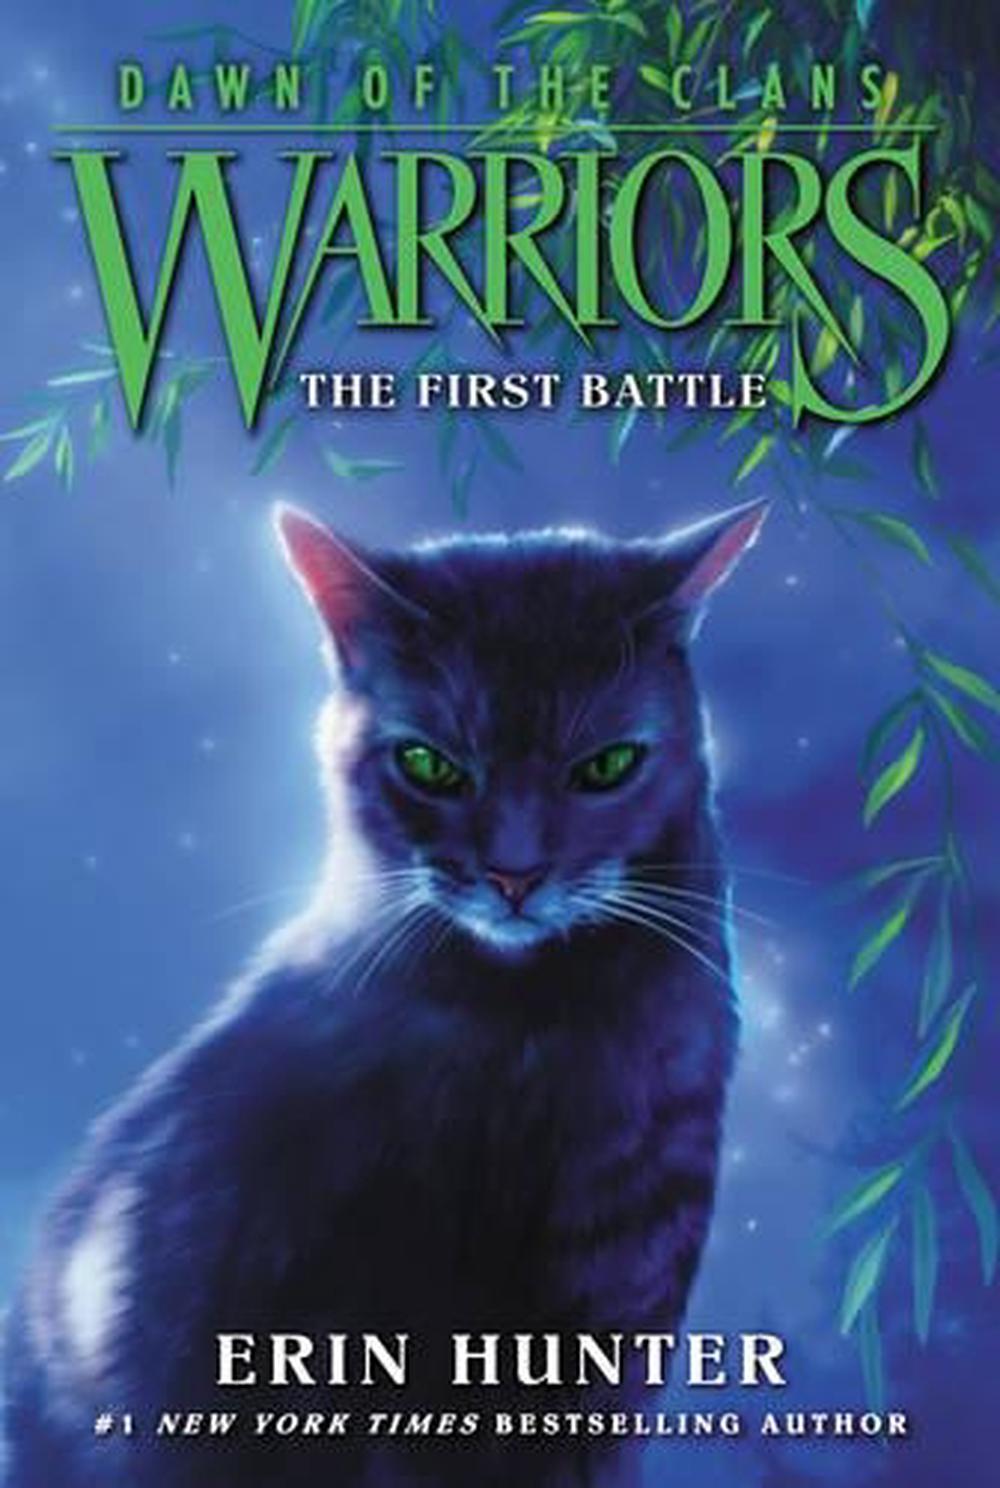 Warriors: Dawn of the Clans #3: the First Battle by Erin Hunter ...